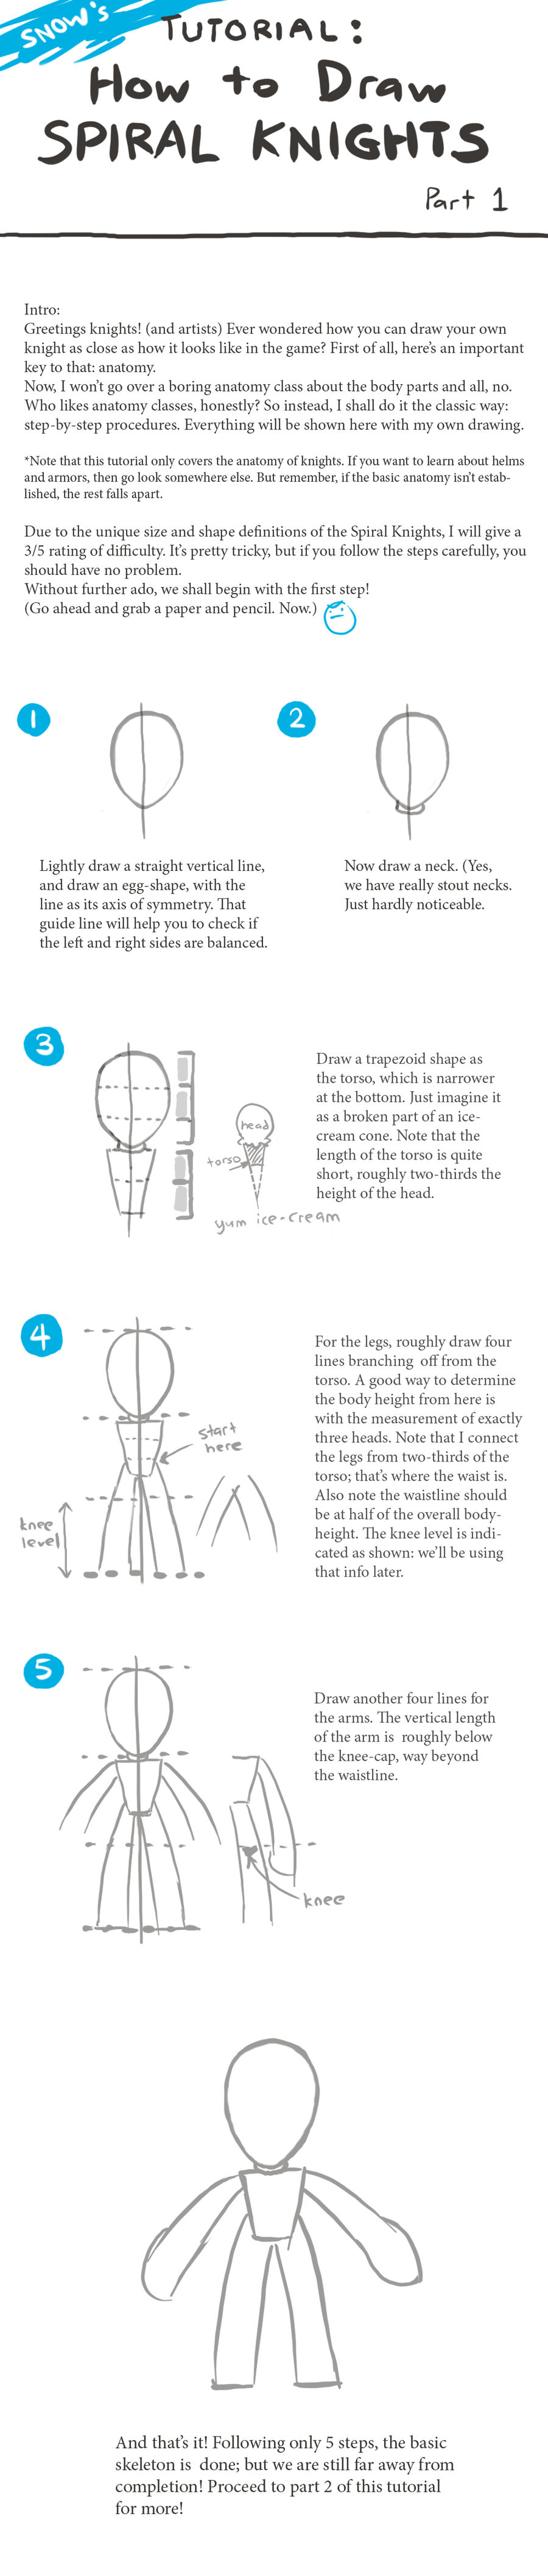 How to Draw Spiral Knights! - Part 1